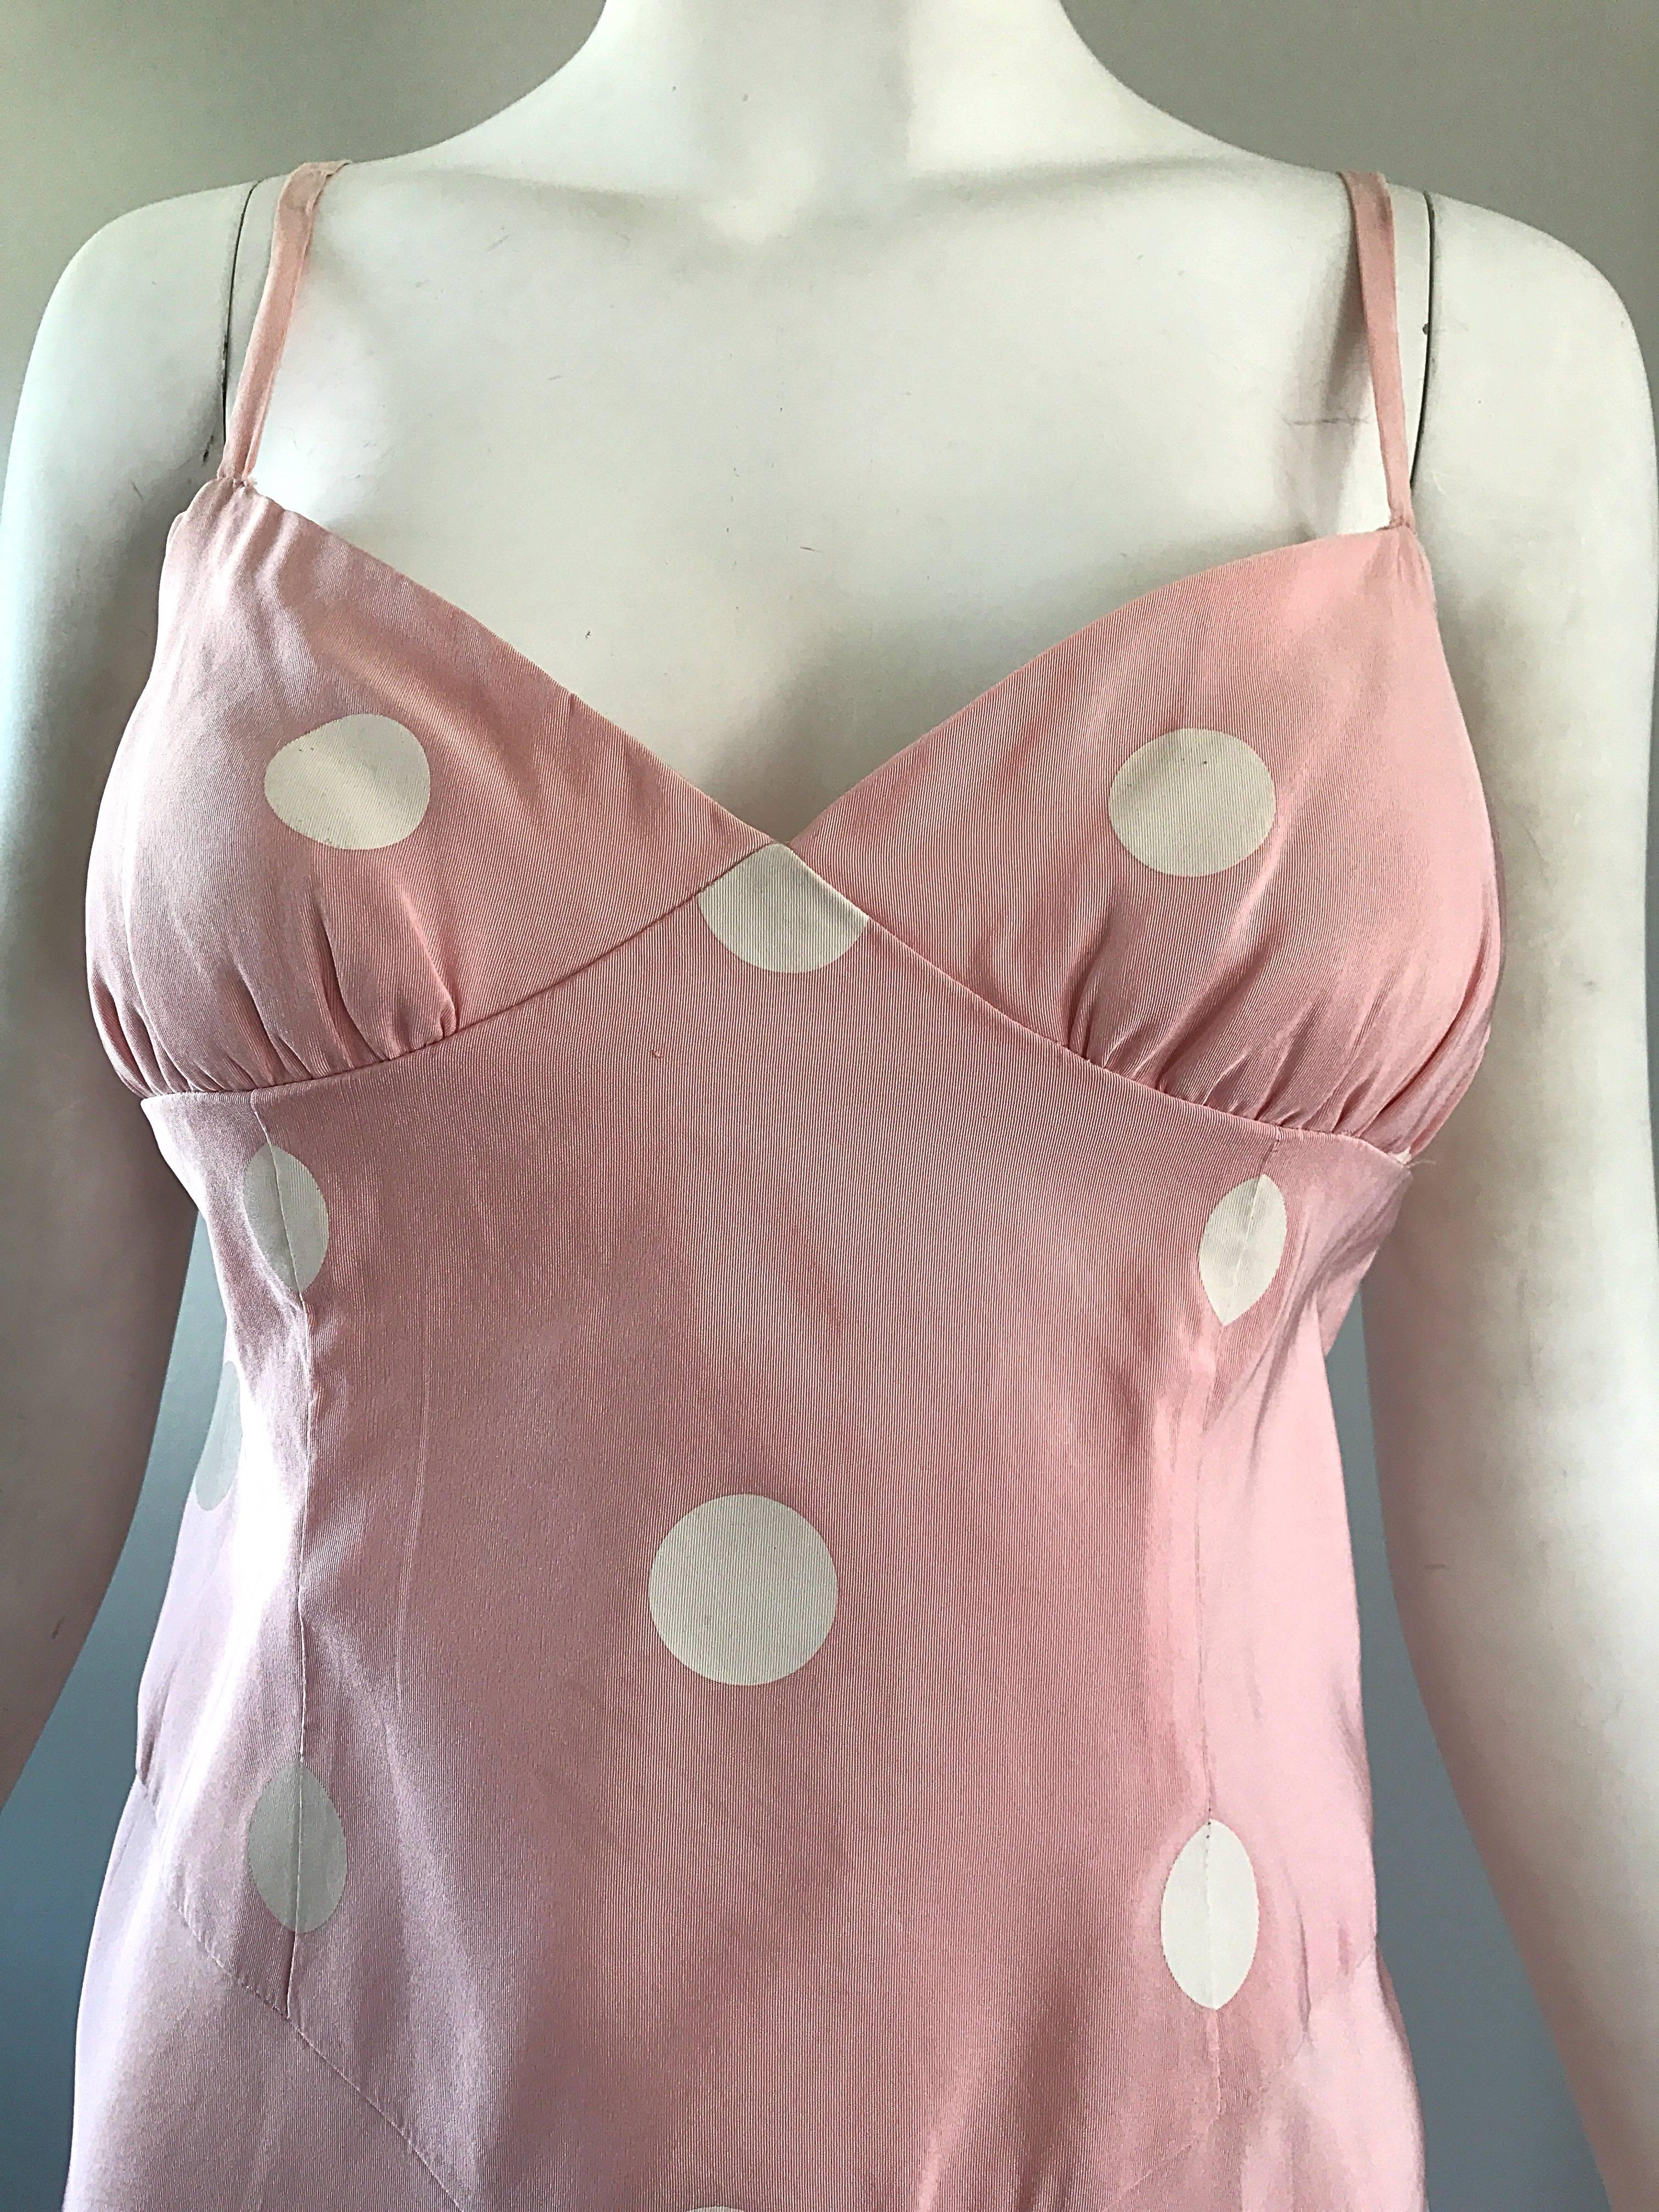 Bill Blass Pink White Polka Dot Hand Painted Fit and Flare Vintage Dress, 1990 For Sale 2